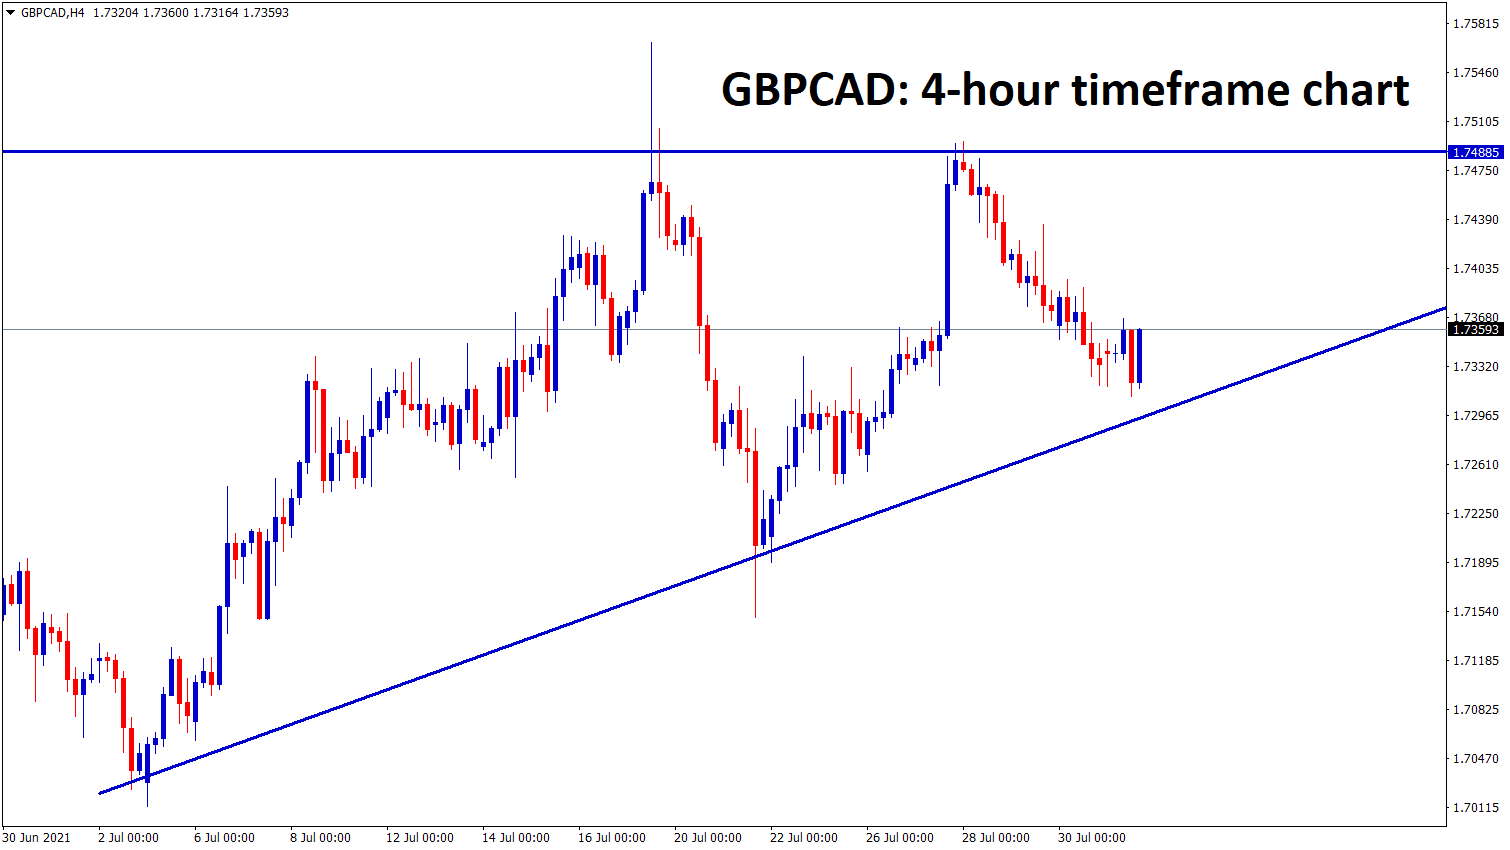 GBPCAD has formed an Ascending Triangle pattern in the h4